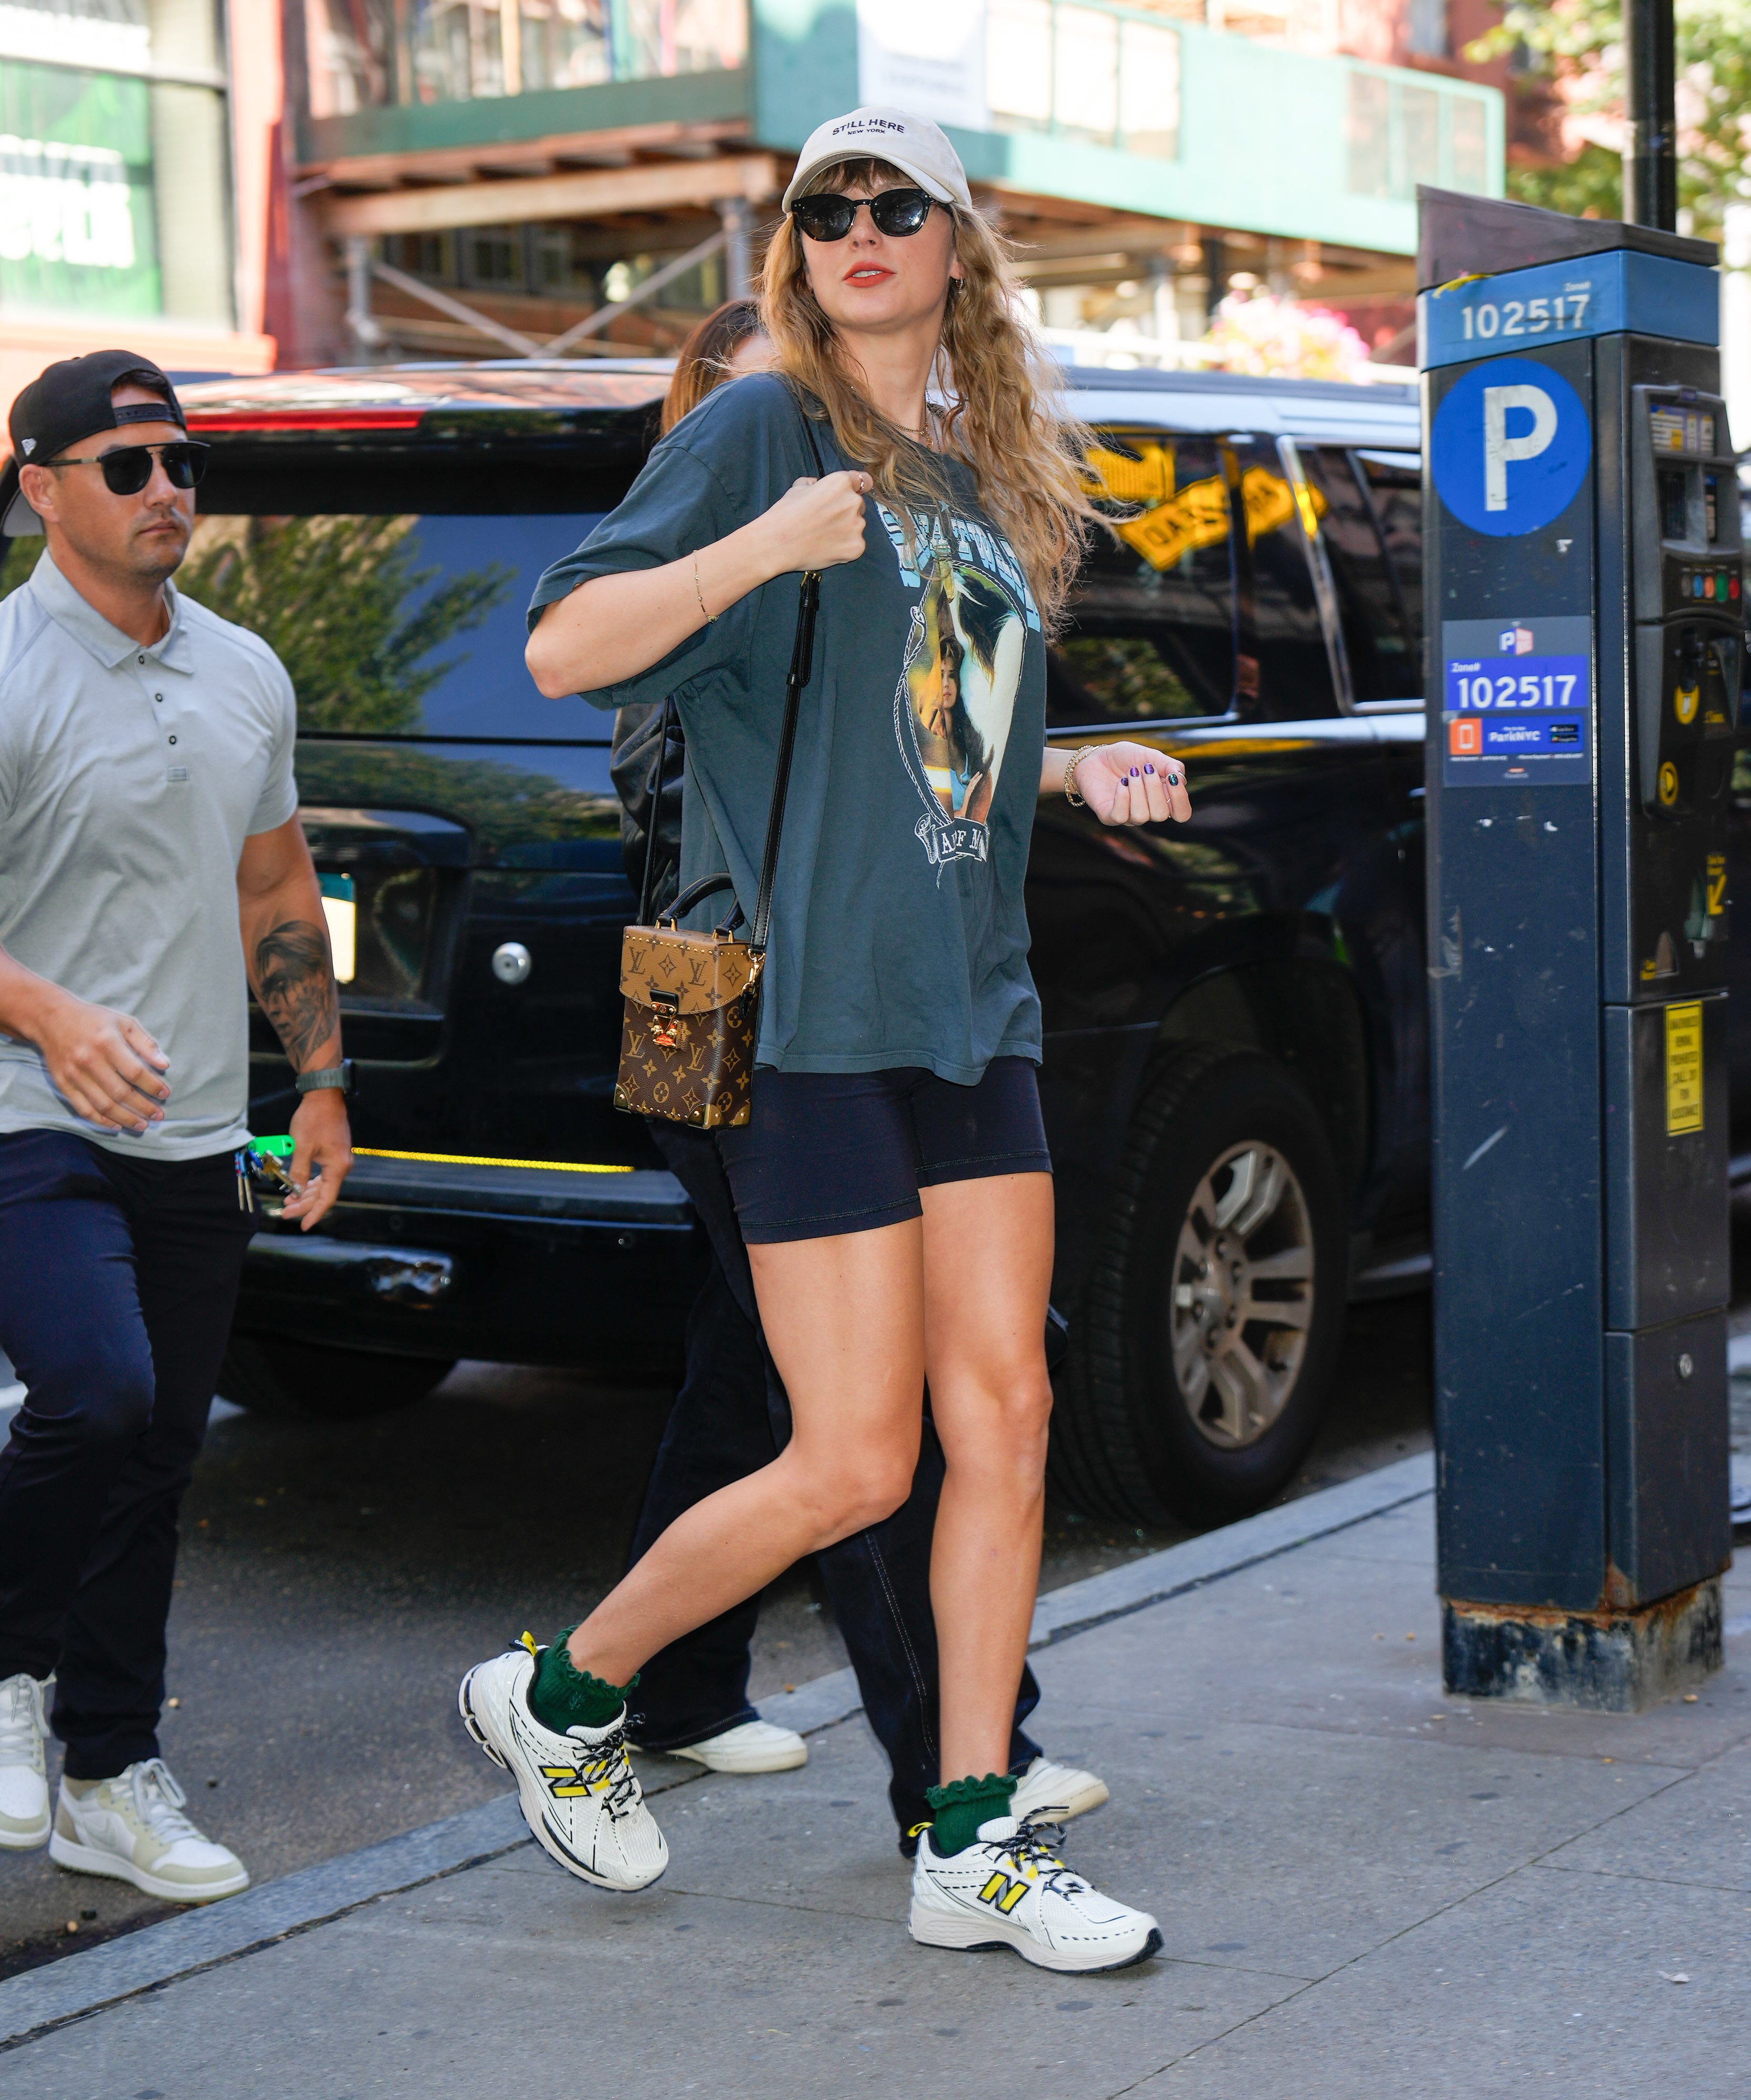 Louis Vuitton Camera Box Bag worn by Taylor Swift Out in New York